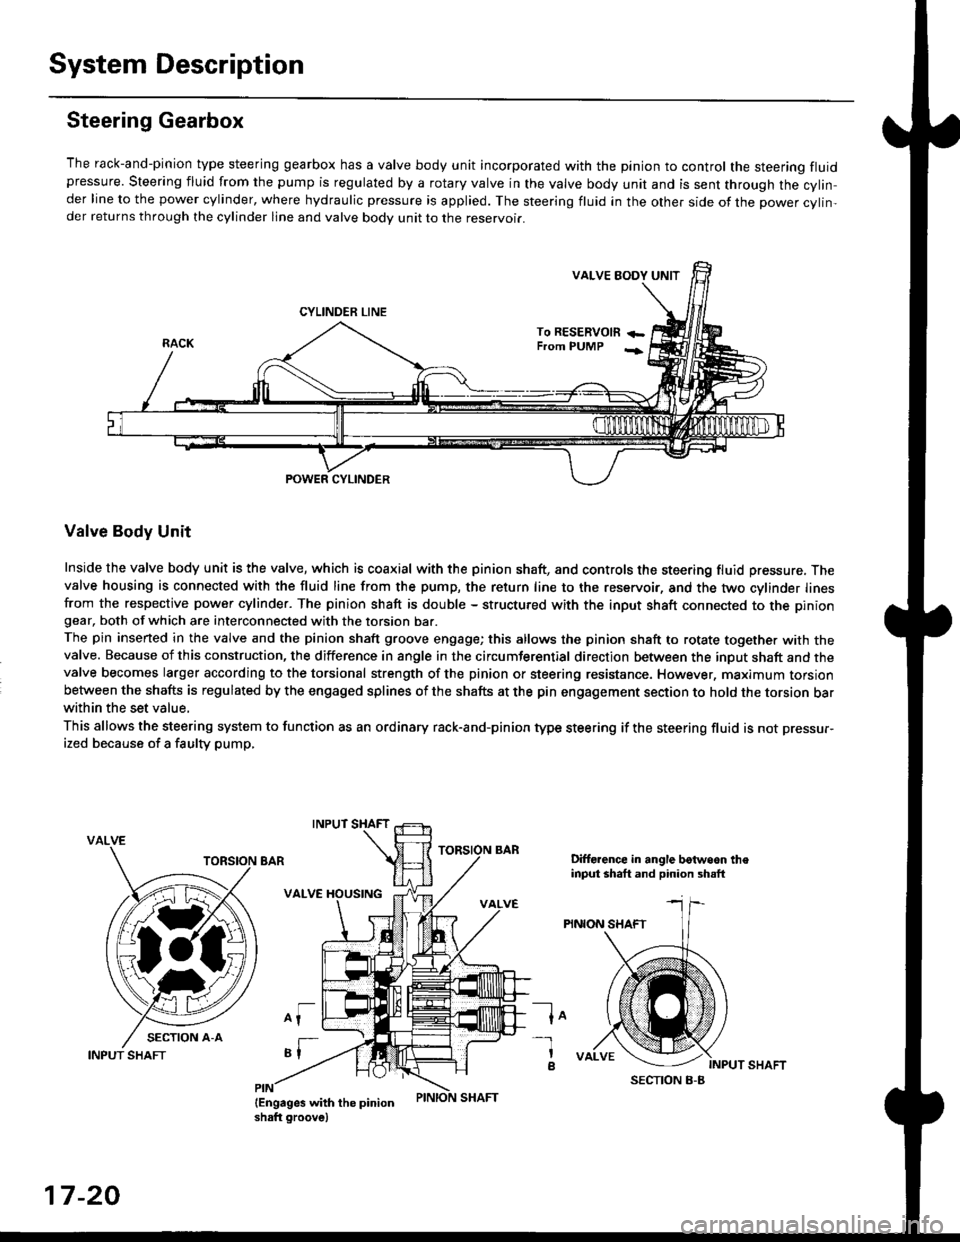 HONDA CIVIC 1996 6.G User Guide System Description
Steering Gearbox
The rack-and-pinion type steering gearbox has a valve body unit incorporated with the pinion to control the steering fluidpressure. Steering fluid from the pump is 